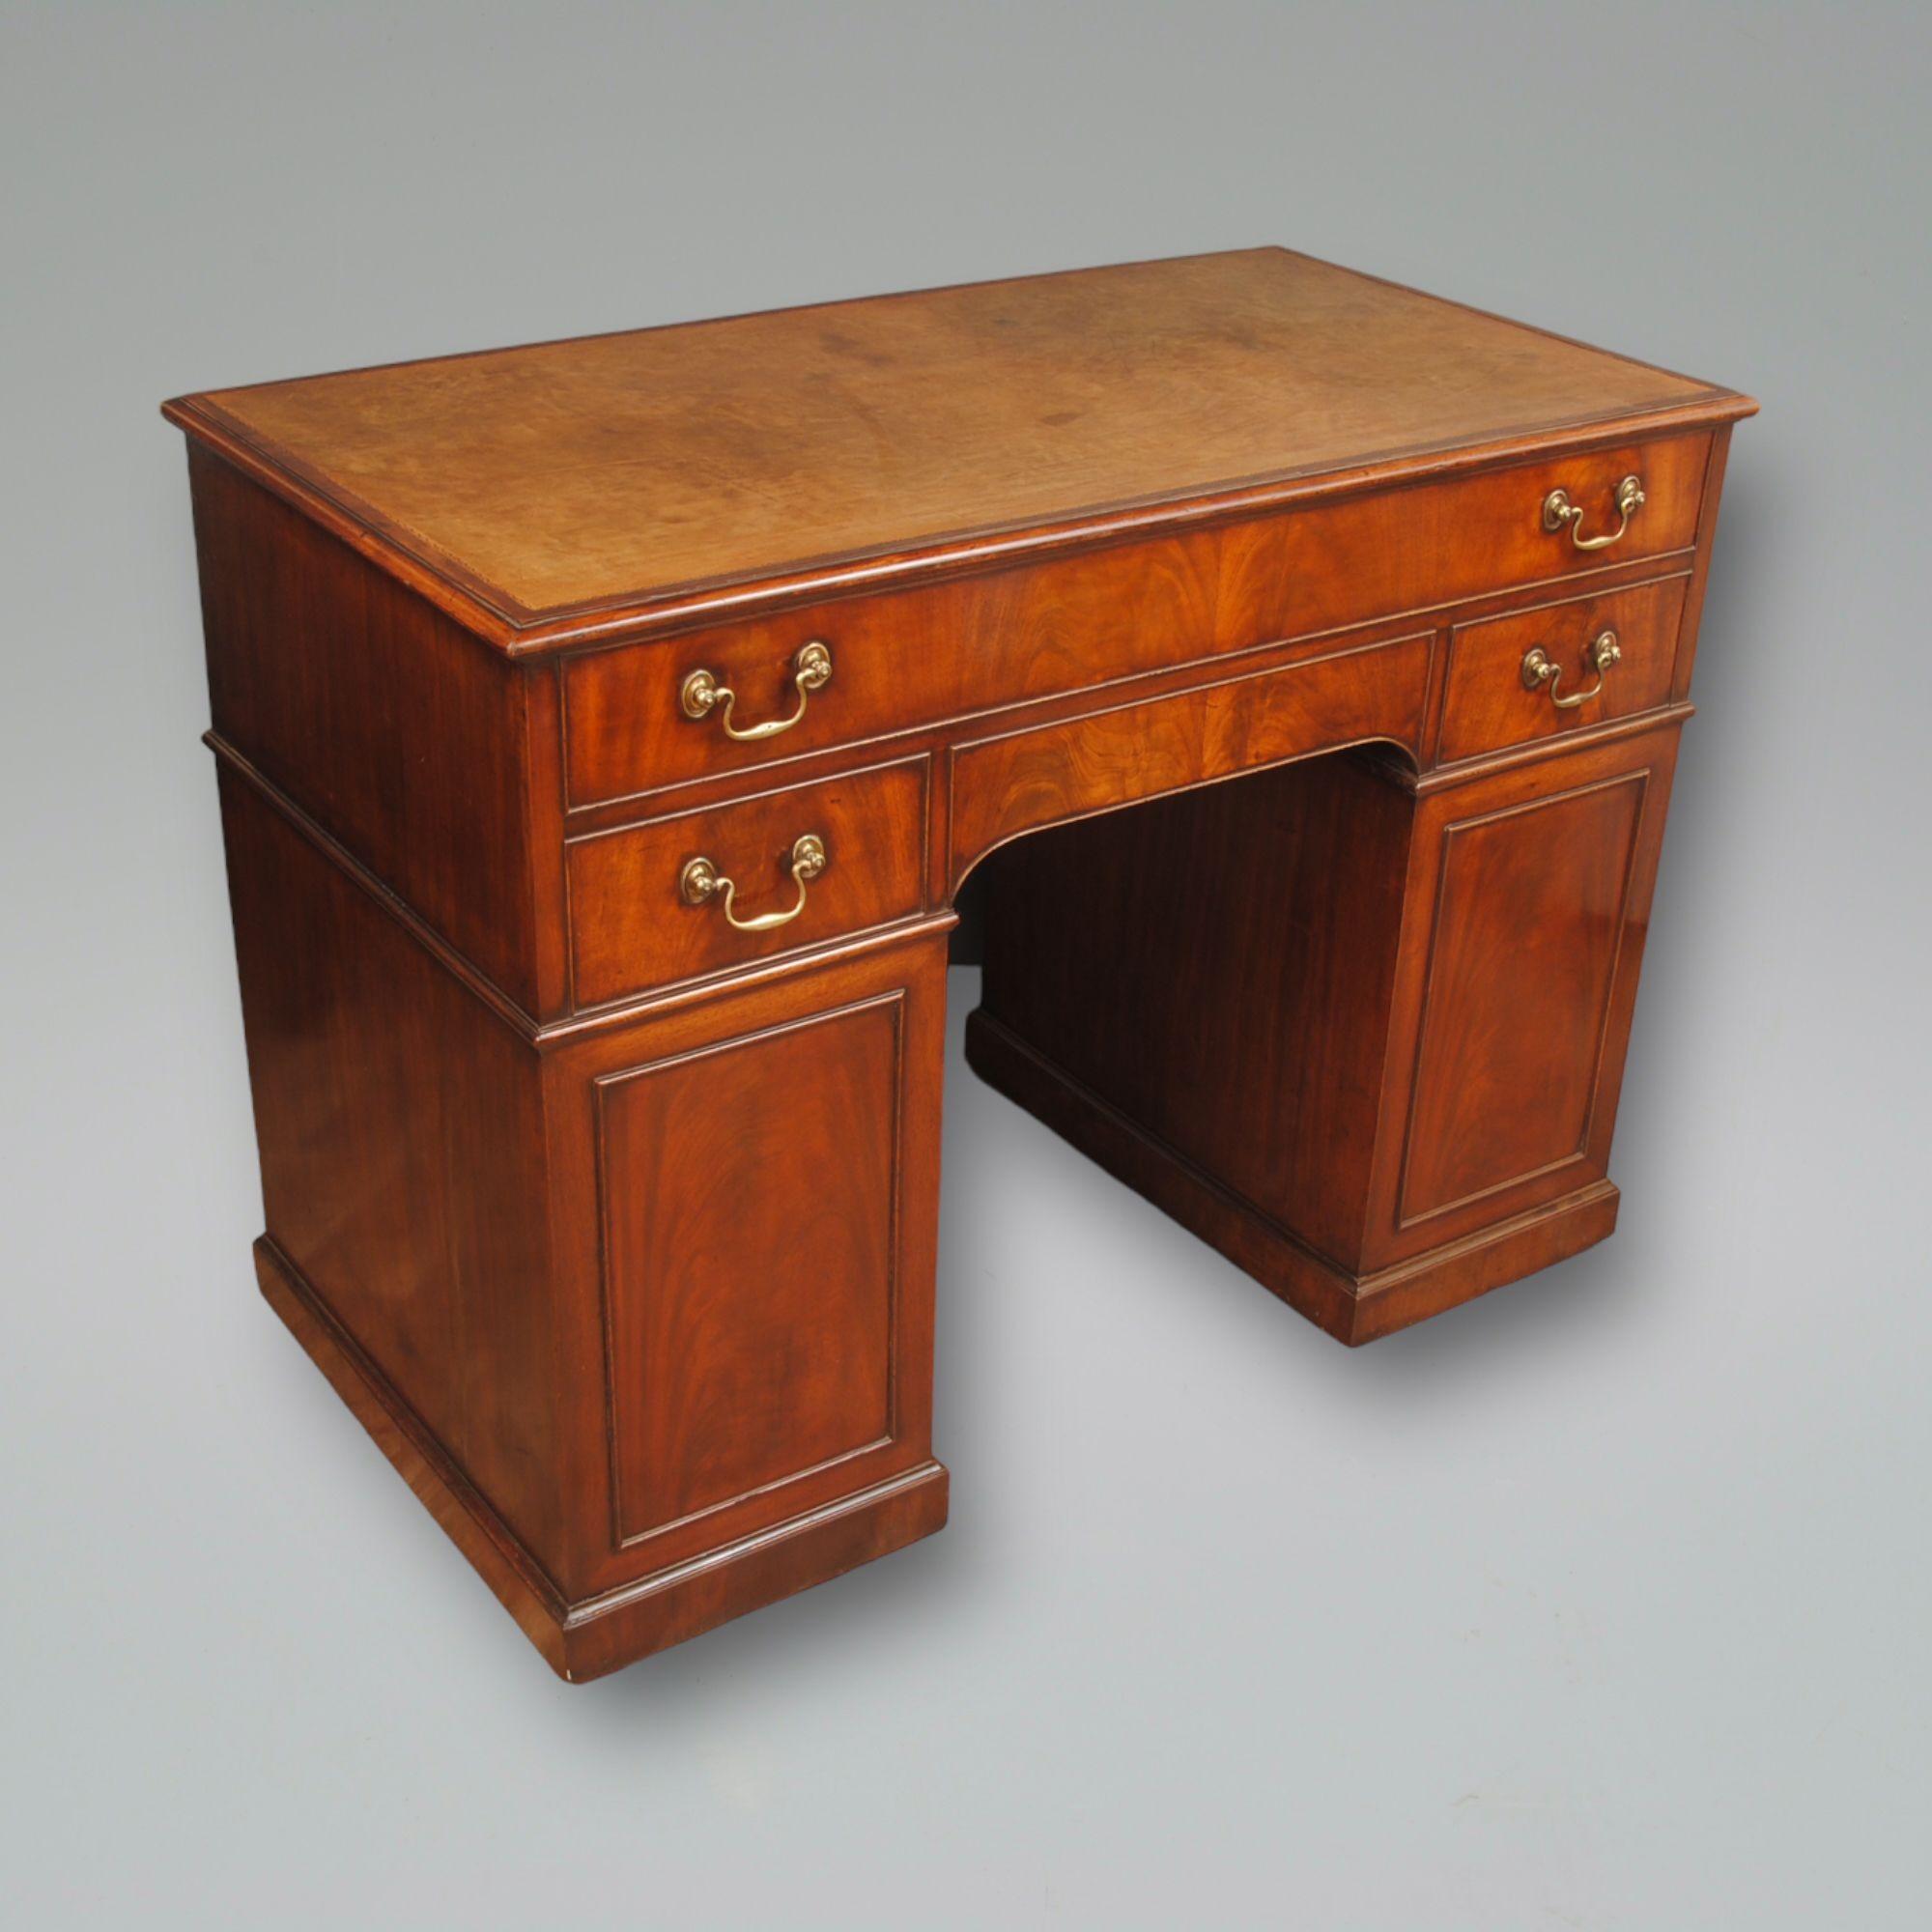 English George III Period Mahogany Fitted Desk Attributed to Gillows of Lancaster For Sale